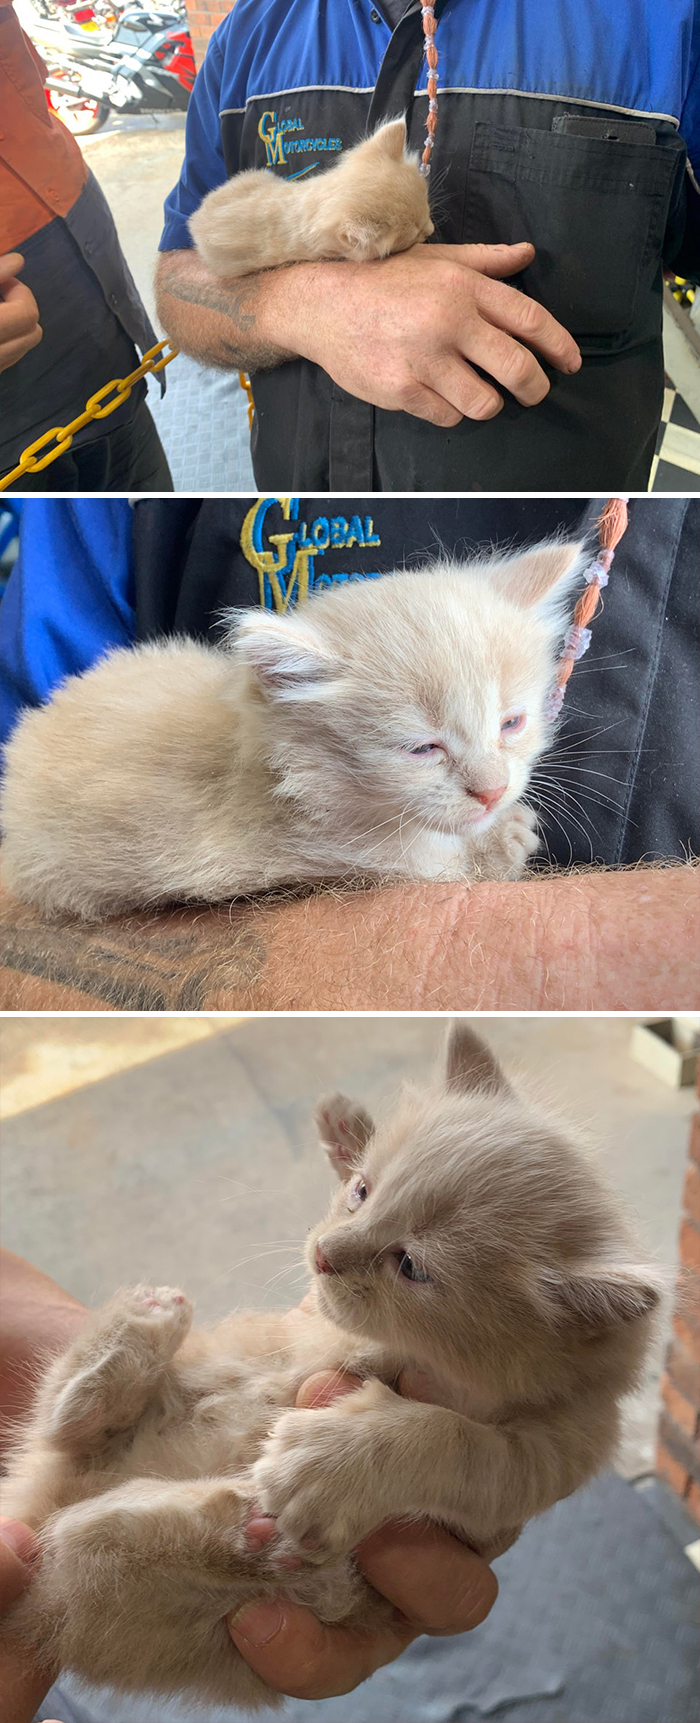 Not A Rolled In But More Of A Birth Into The Shop... Stray Left A Puddle Of Kittens Out In Our Side Yard A Year Ago. The Neighbour Took This One Home And The Boss Took Another